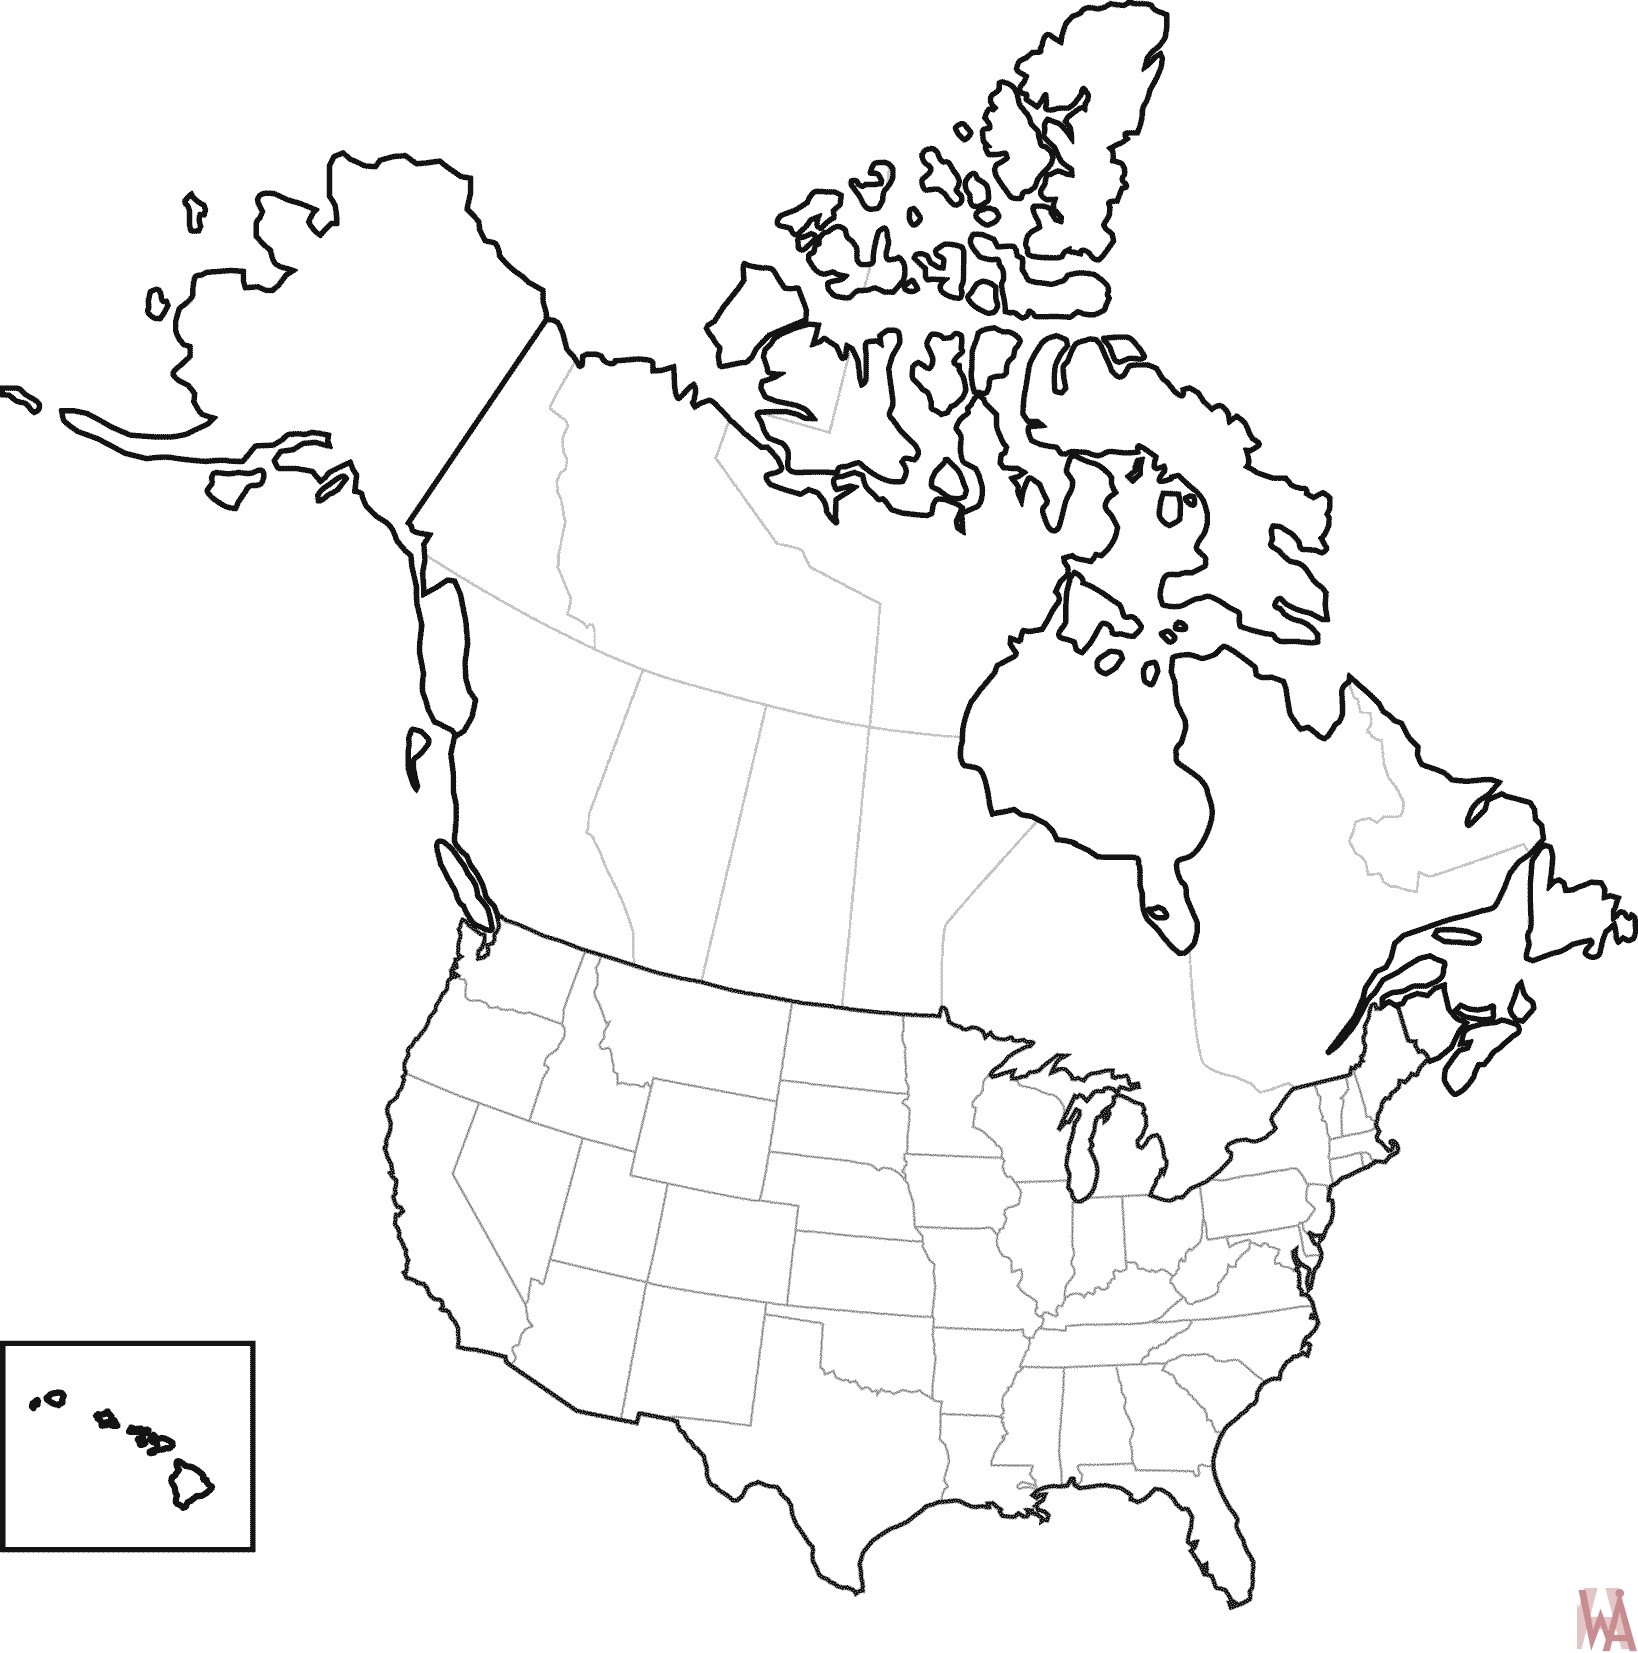 blank map of united states and canada Blank Outline Map Of The United States And Canada Whatsanswer blank map of united states and canada